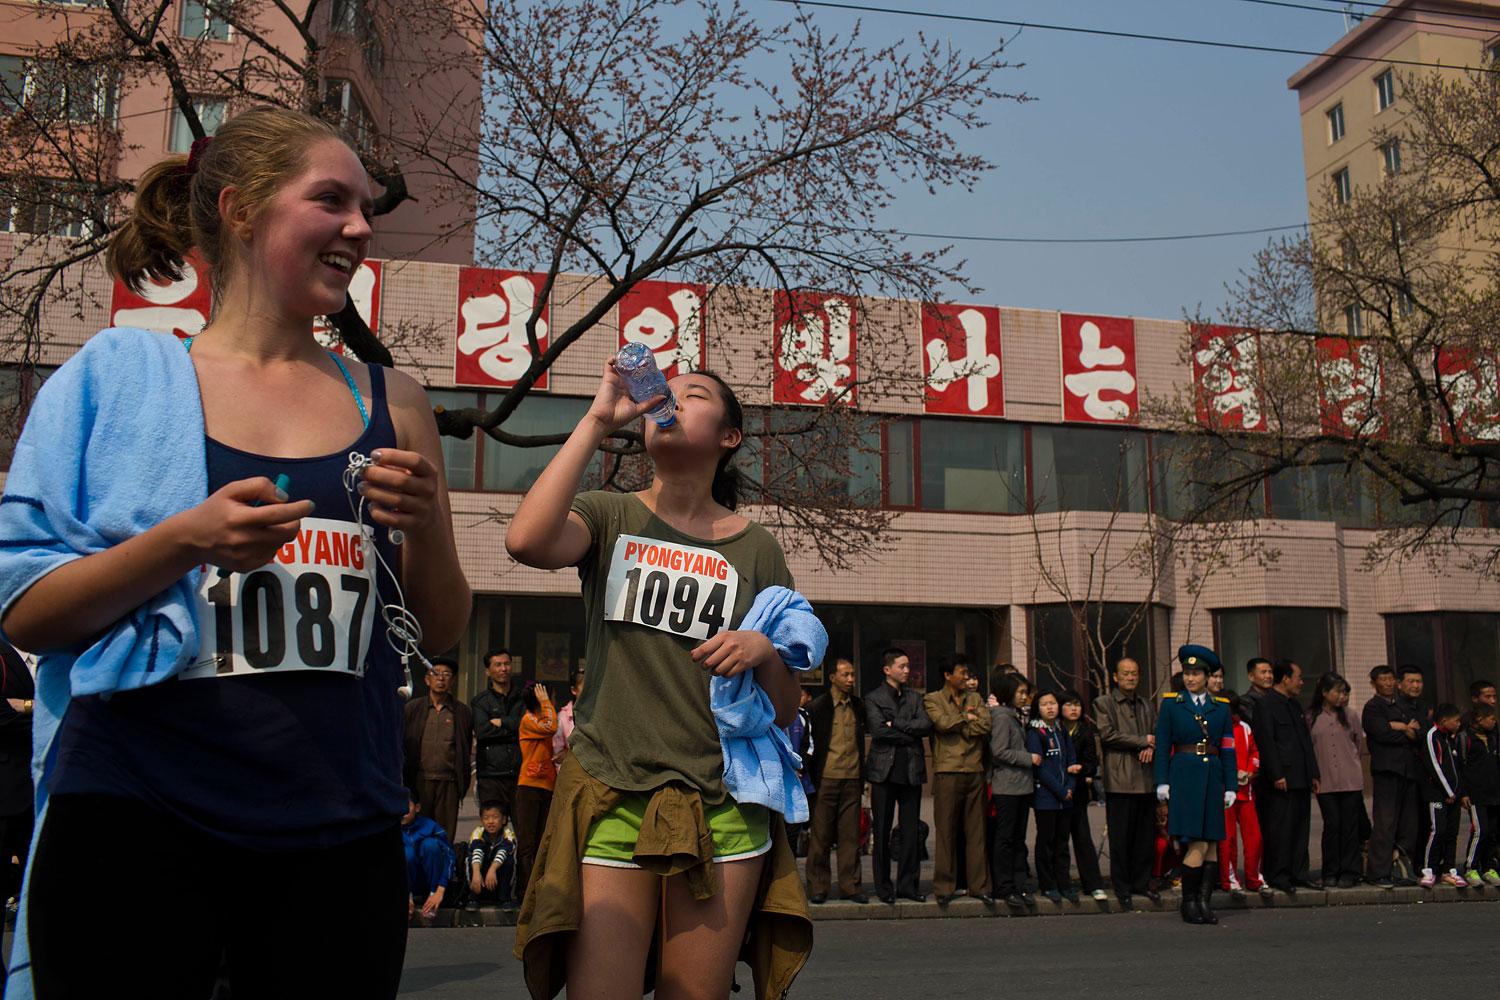 Tourists who competed in the shorter distance segments of the marathon, rest at the end of the race on April 13, 2014. From left are Harriet Harrper-Jones, England, and Allie Wu, Taiwan. The sign behind them reads  Long Live the Shining Revolutionary Tradition of Our Party.